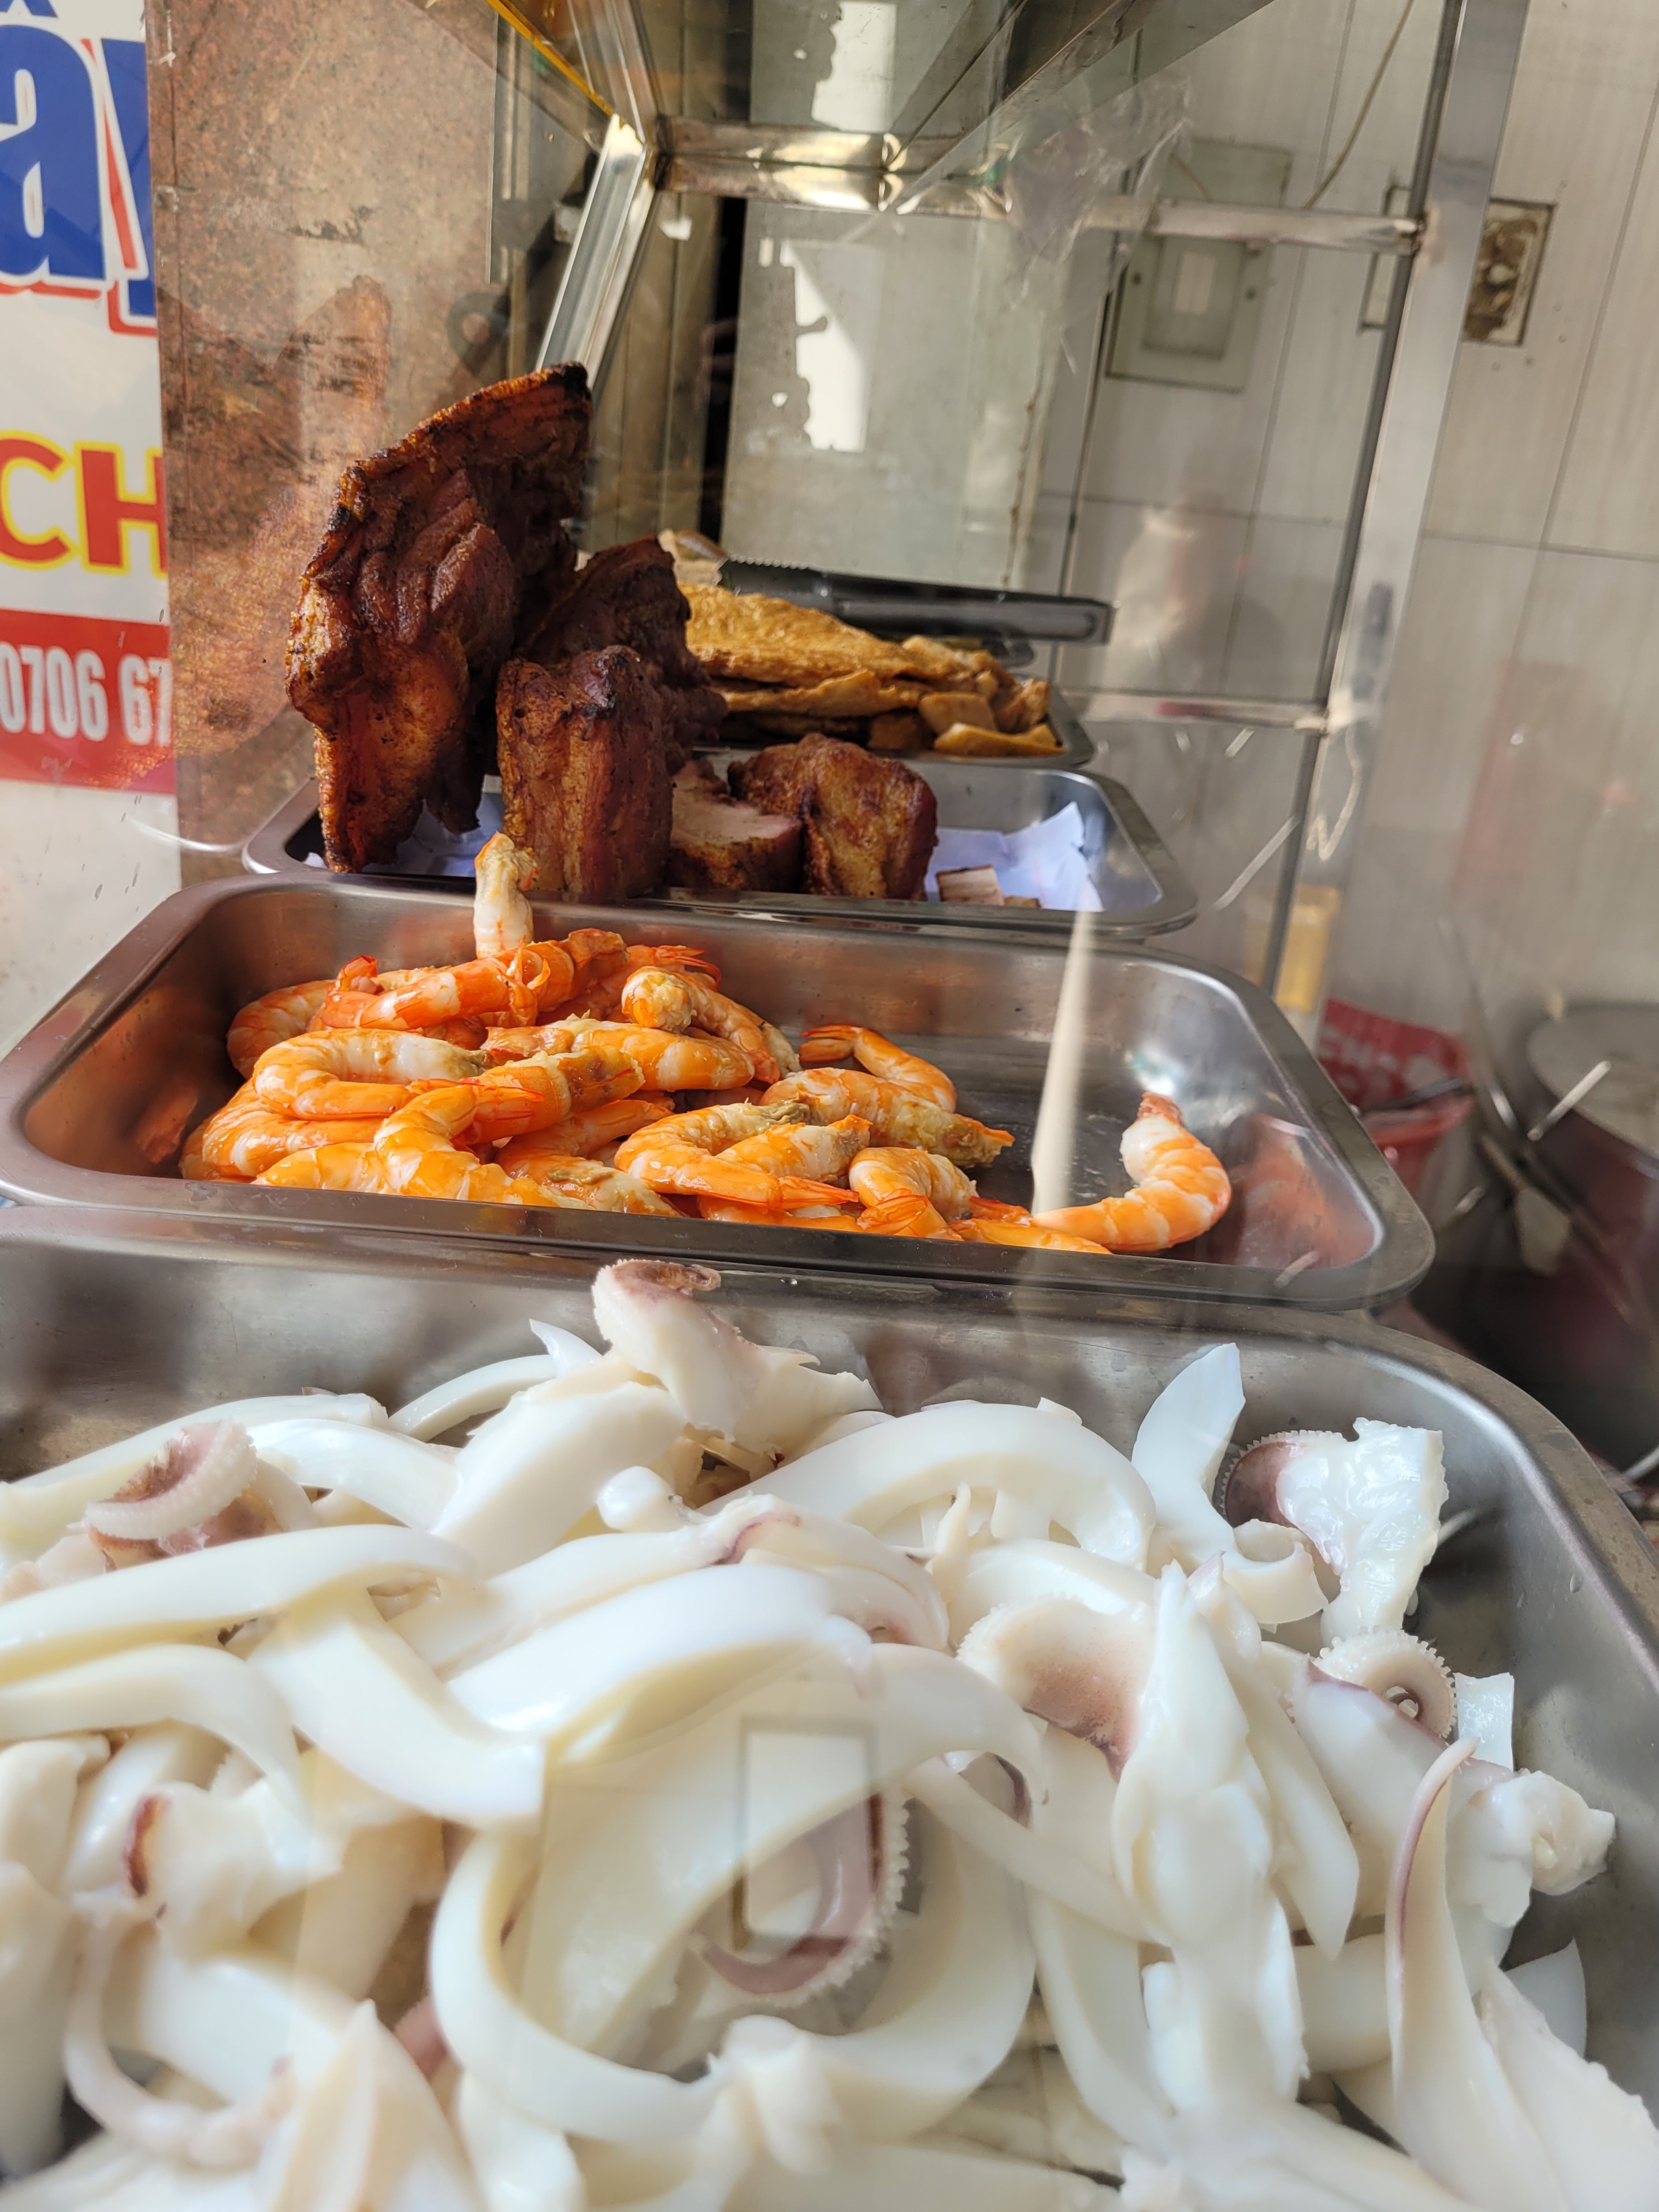 Trays of squids, shrimps and pork waiting to be served with bun mam at a restaurant in Binh Thanh District in Ho Chi Minh City. Photo: Ray Kuschert